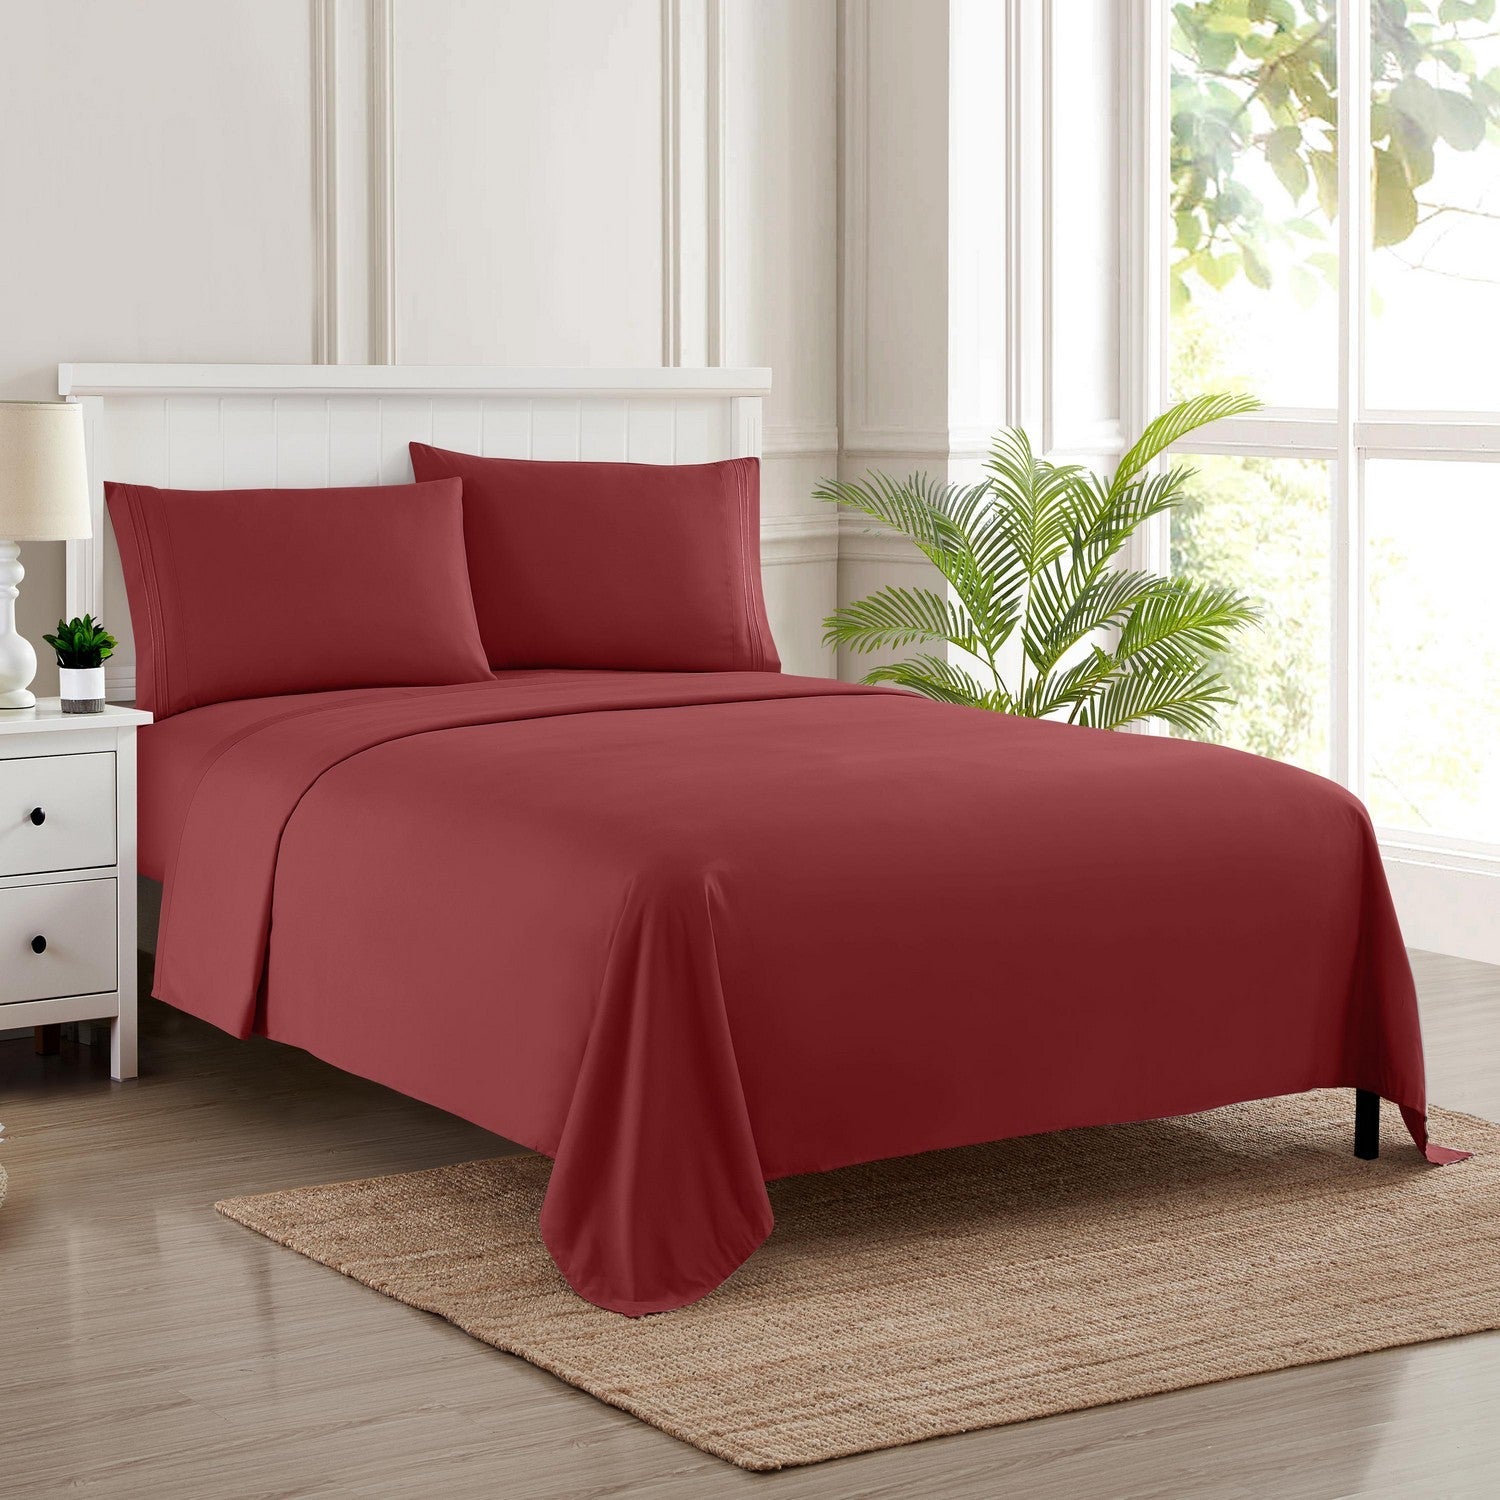 Classic 4-Piece Bed Sheet Set (Burgundy) - Bed